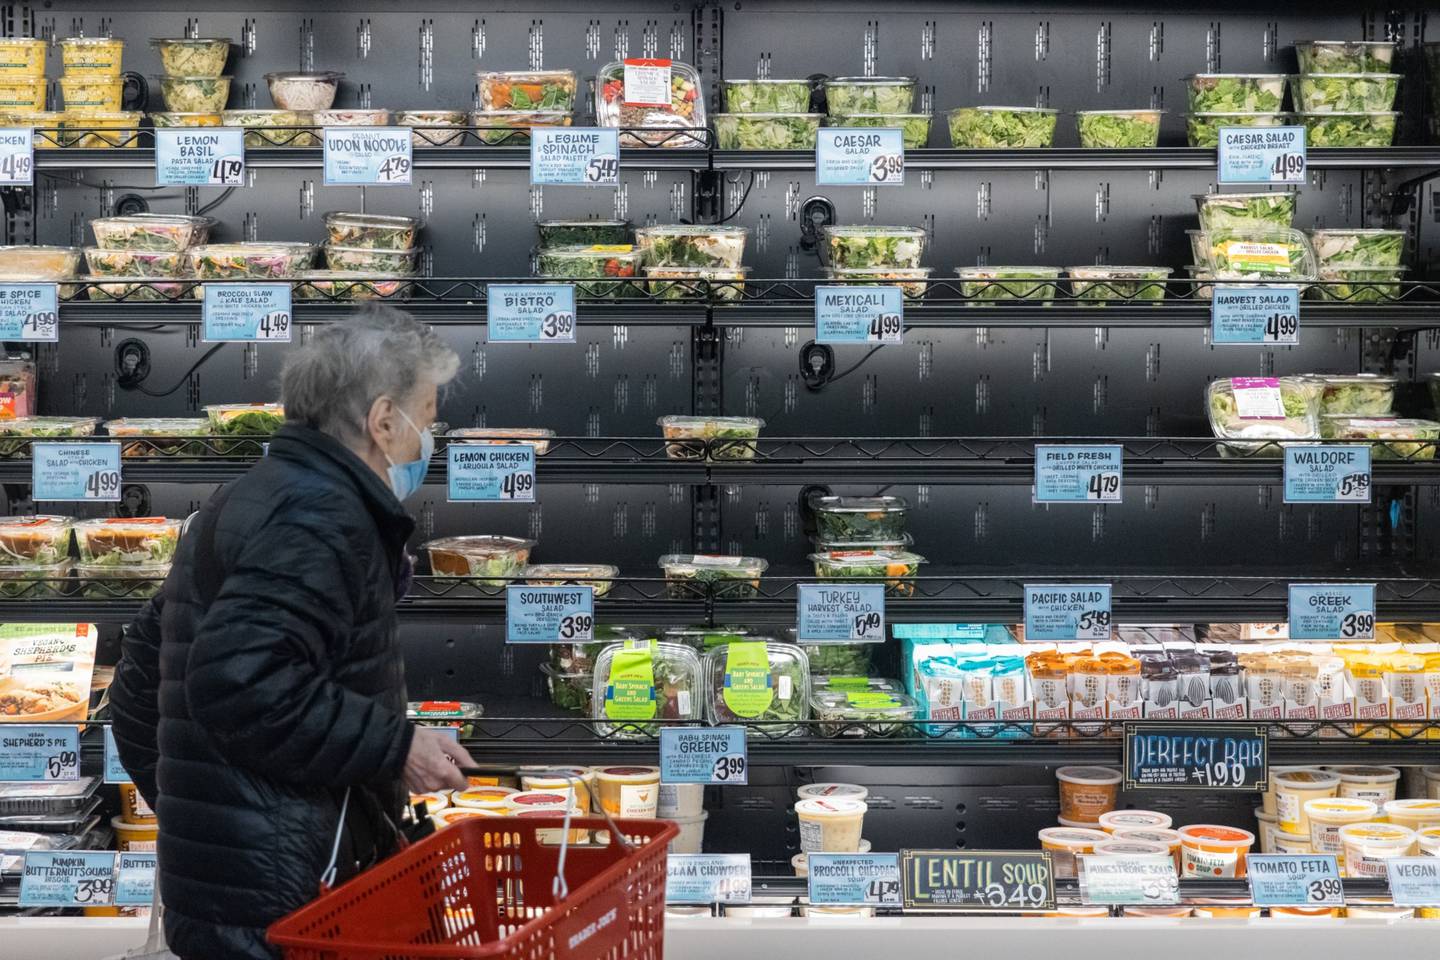 A customer shops in the prepared food section of the Trader Joe's Upper East Side Bridgemarket grocery store in New York, U.S., on Thursday, Dec. 2, 2021. The century-old vaulted market under the Queensboro Bridge has reopened on Thursday as a Trader Joe's.